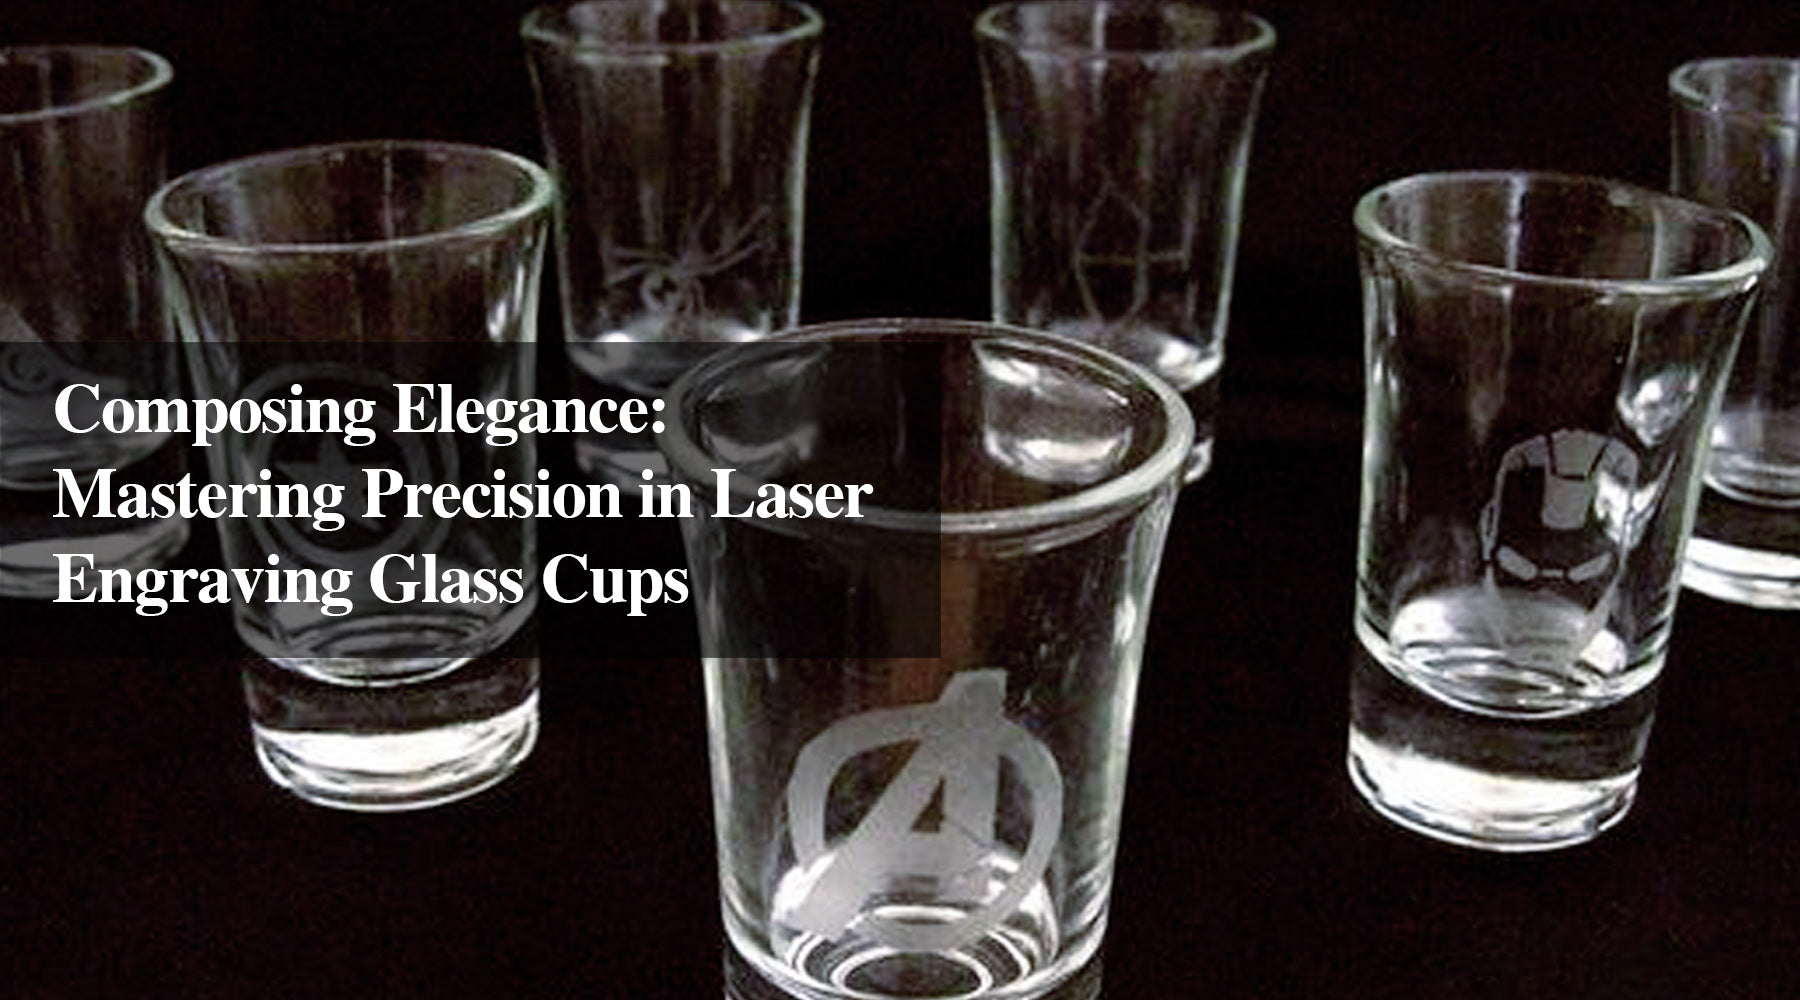 Composing Elegance: Mastering Precision in Laser Engraving Glass Cups